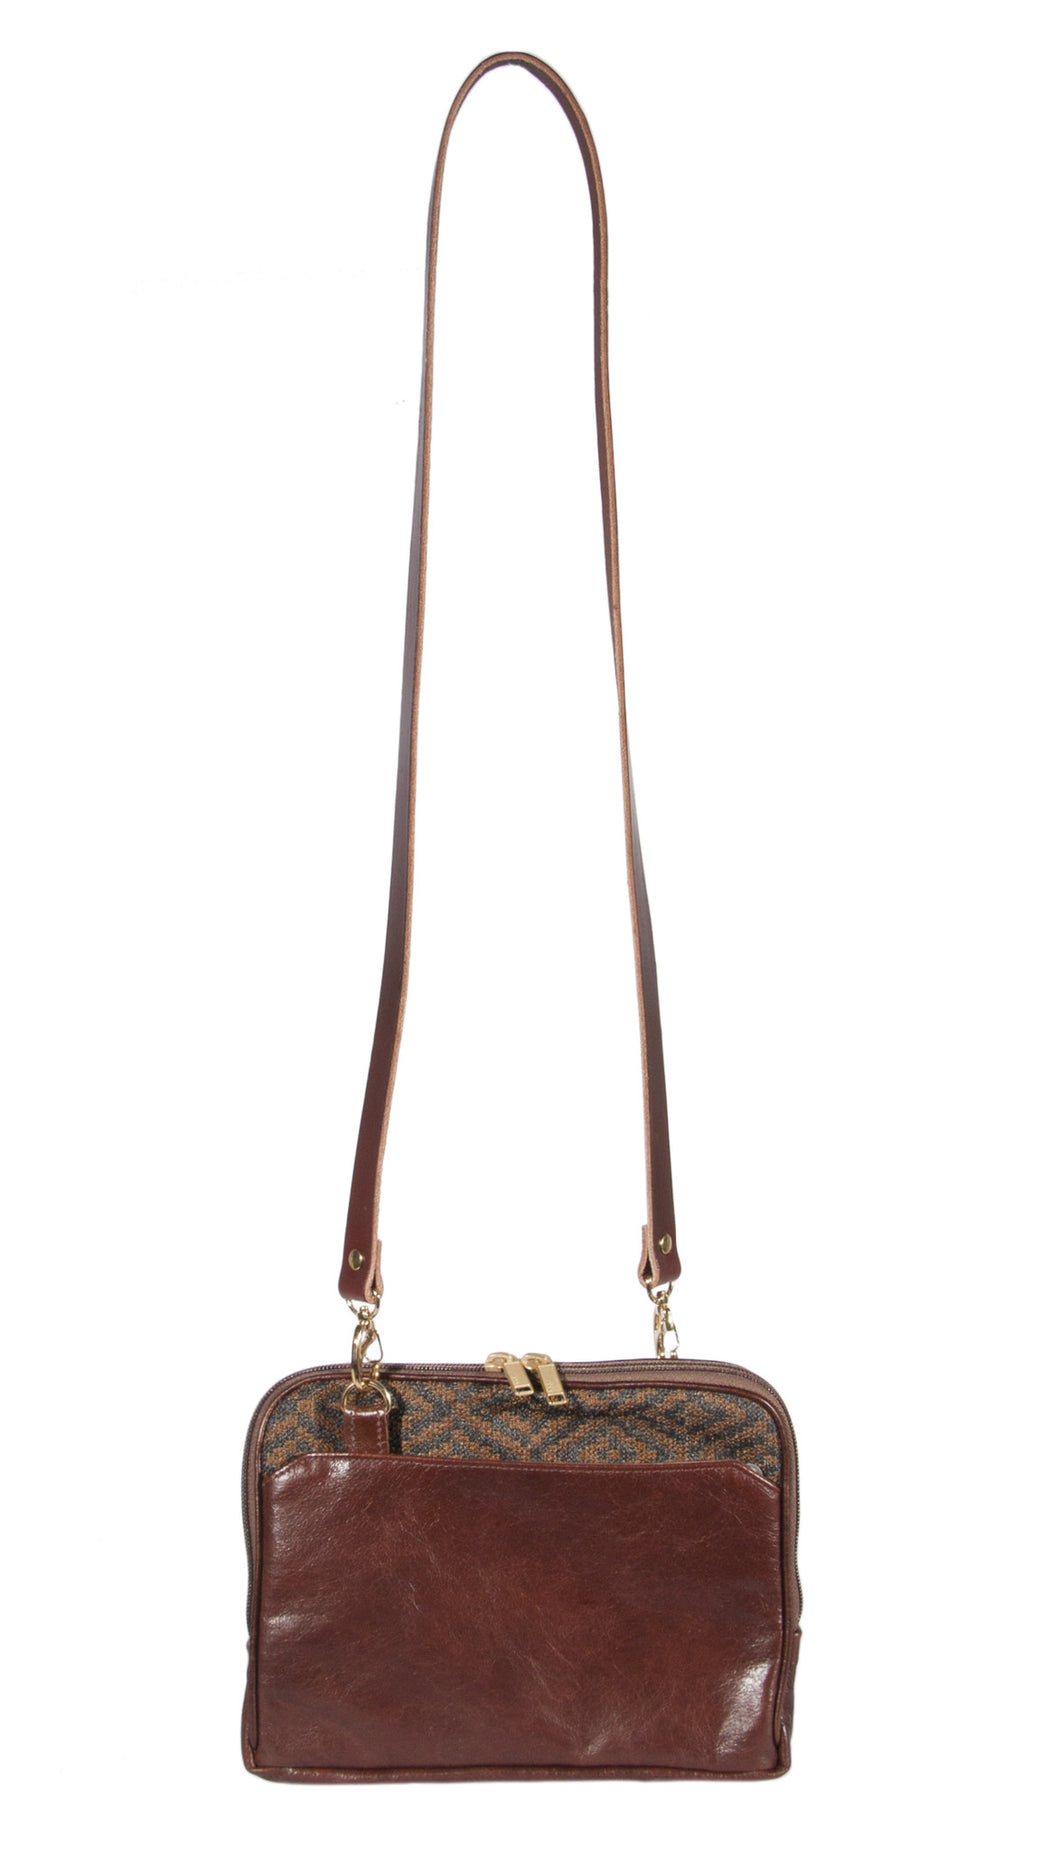 L1029-3038 Small Crossbody Tote Rioja Stone, Structured Leather Base and Adjustable Bridle Leather Shoulder Strap Part of the Unbridled Passion, Cosmetic and Travel Collection 9